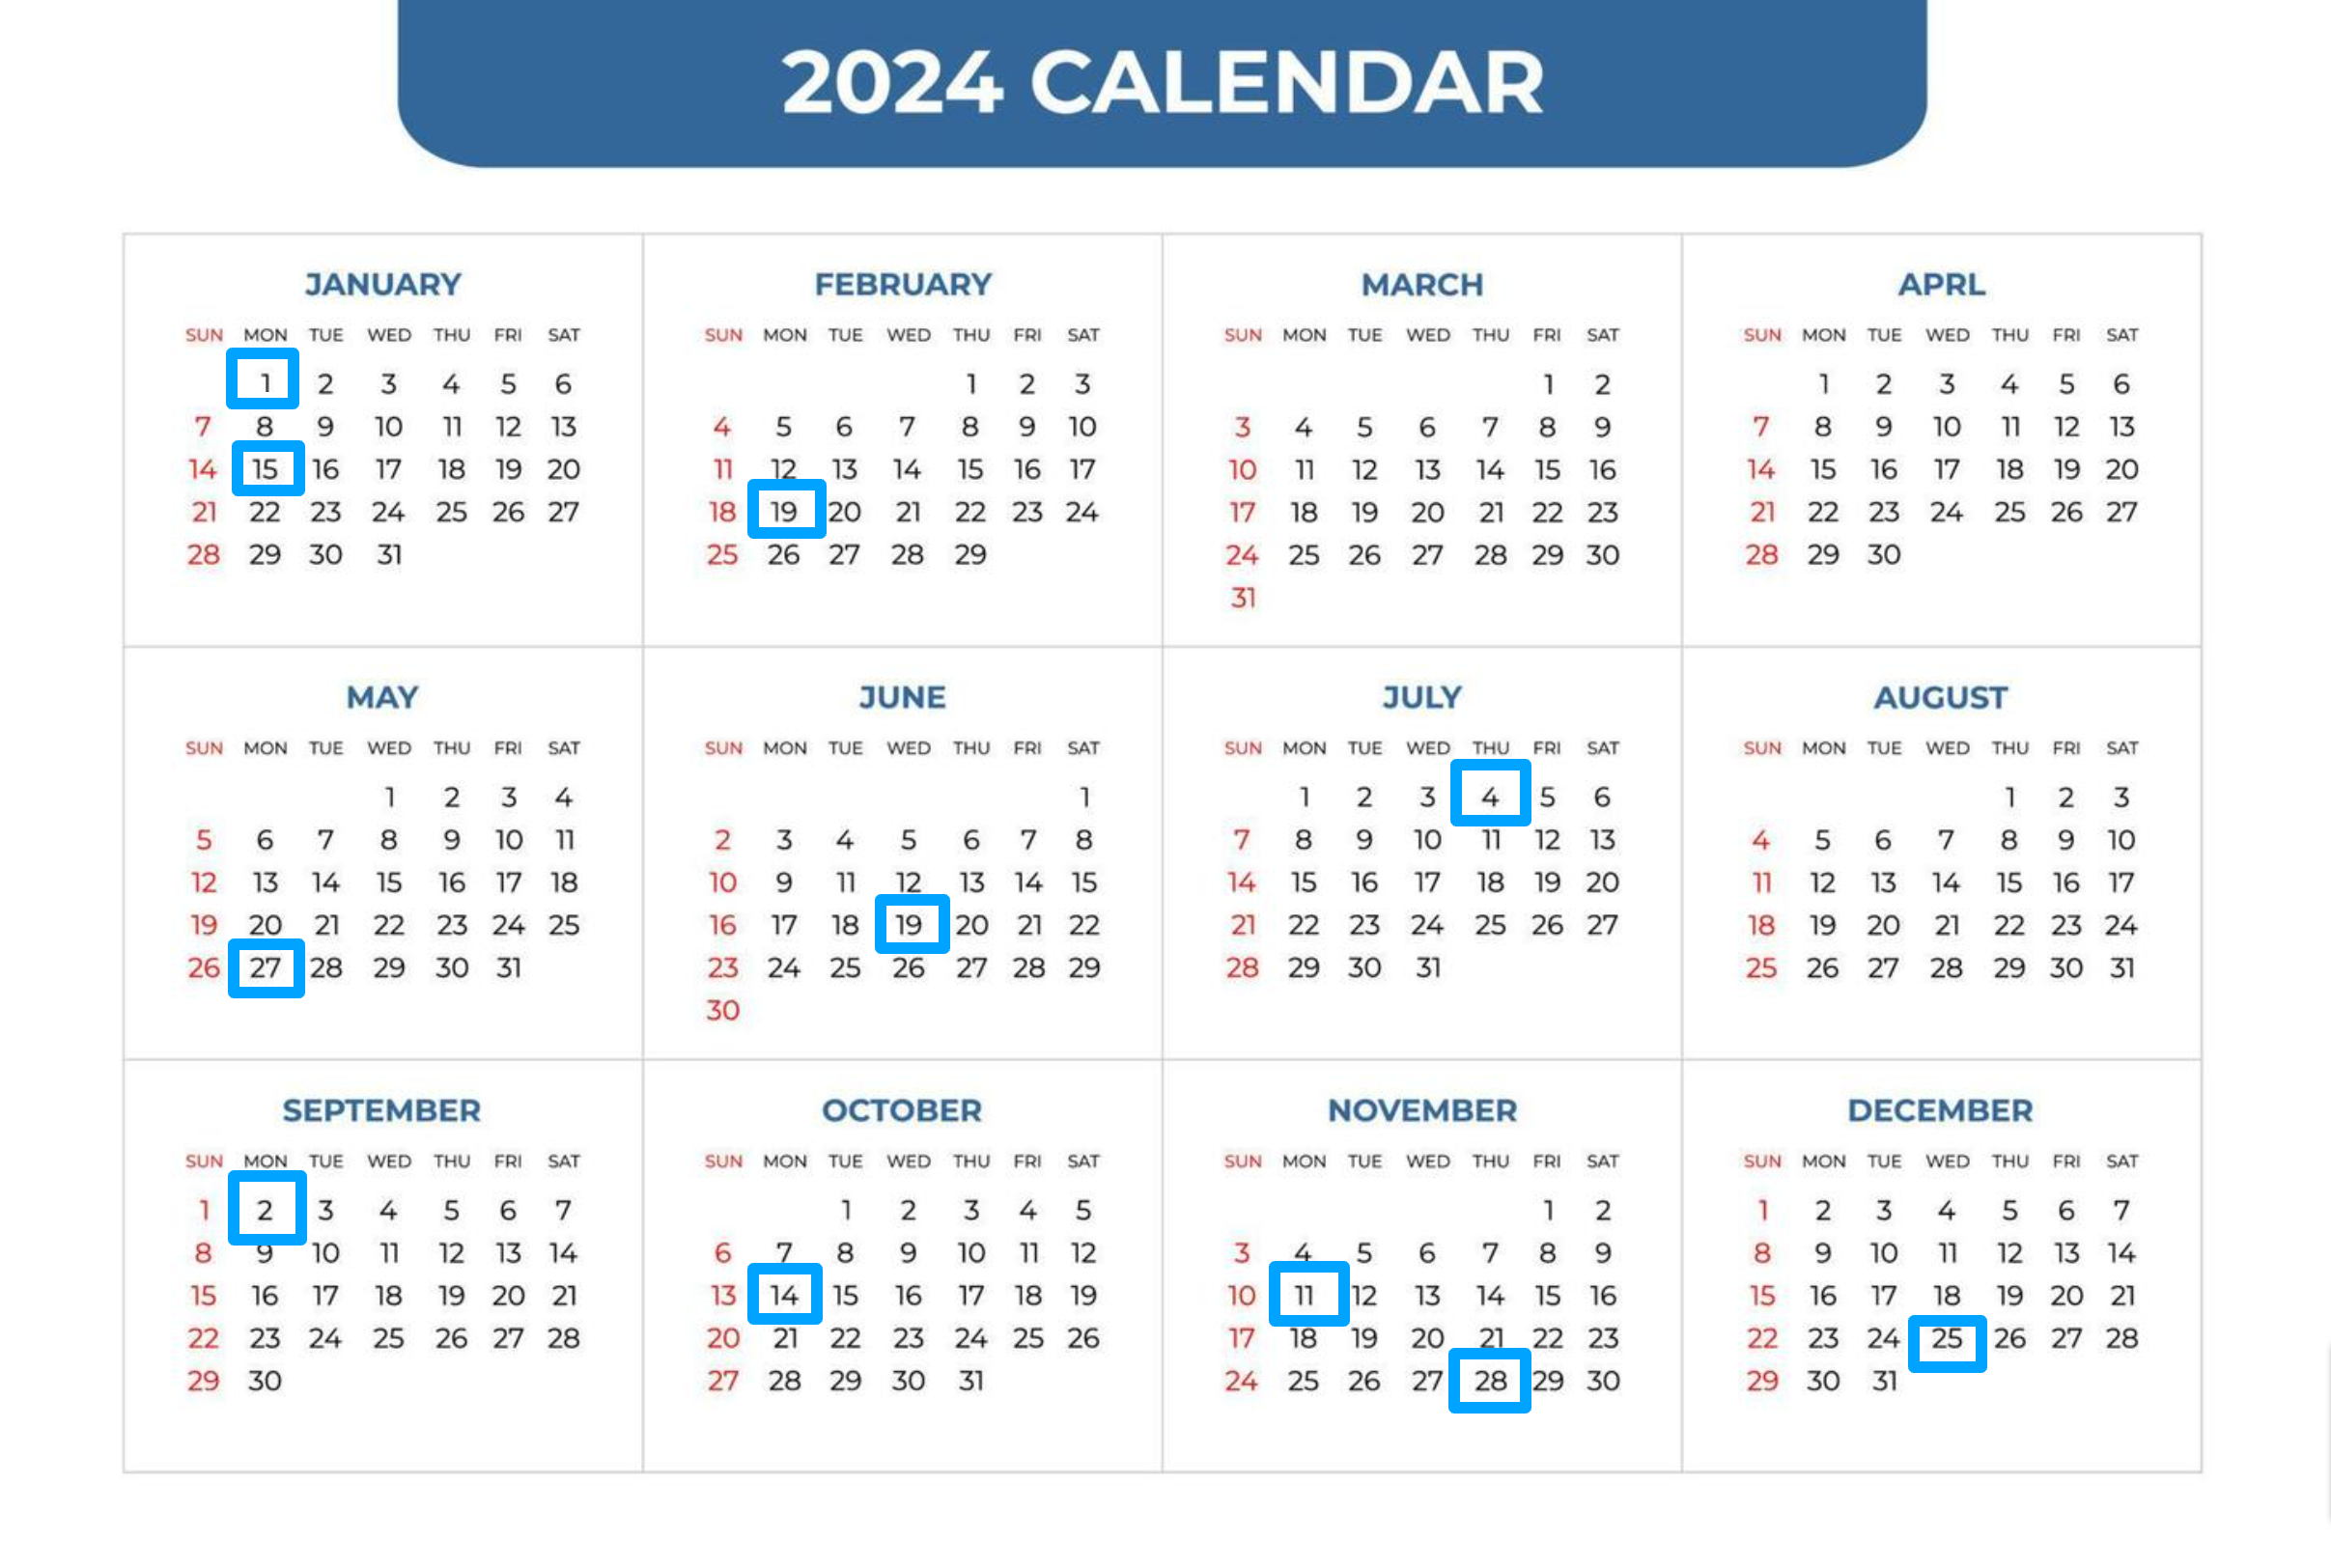 Usps Holiday Schedule 2024 Marna Sharity